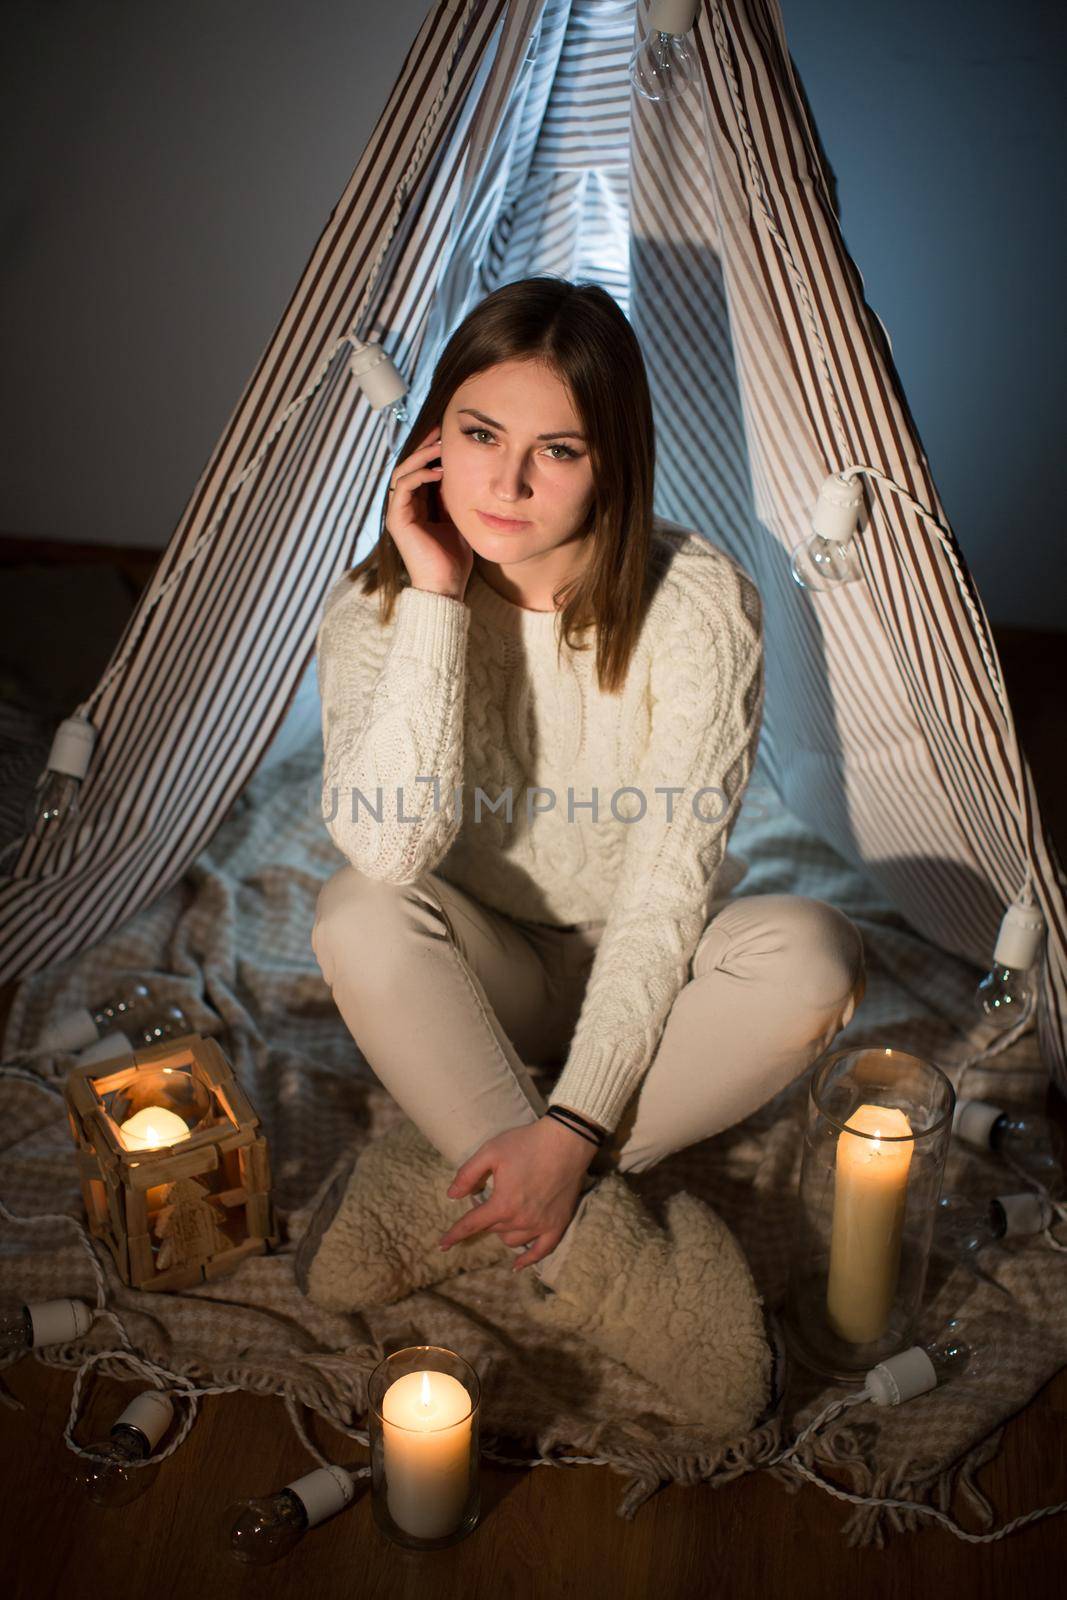 Beautiful girl on Christmas eve, sitting in a comfortable interior. New year